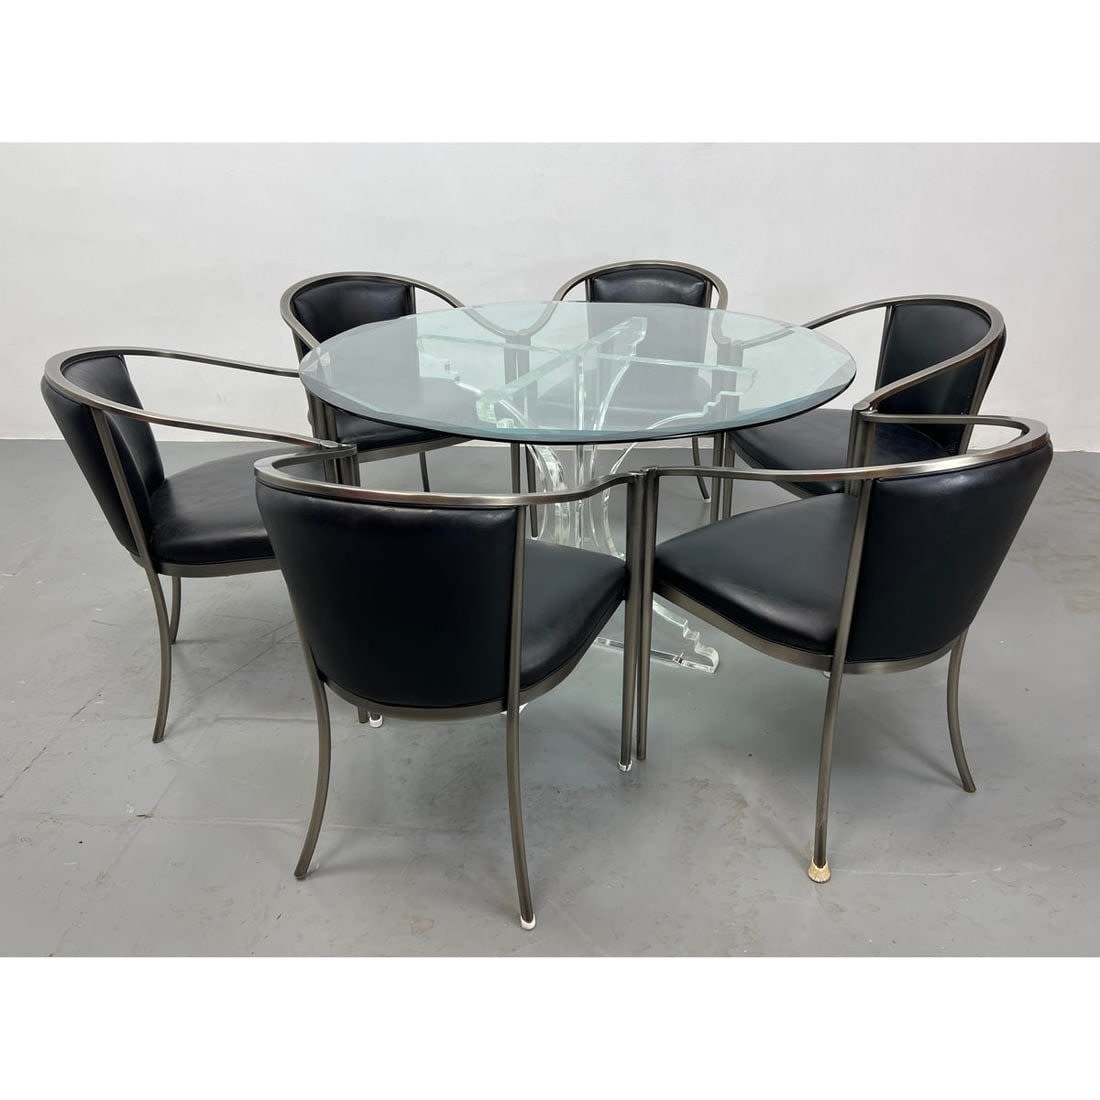 7pc Dining Table and DIA Stainless